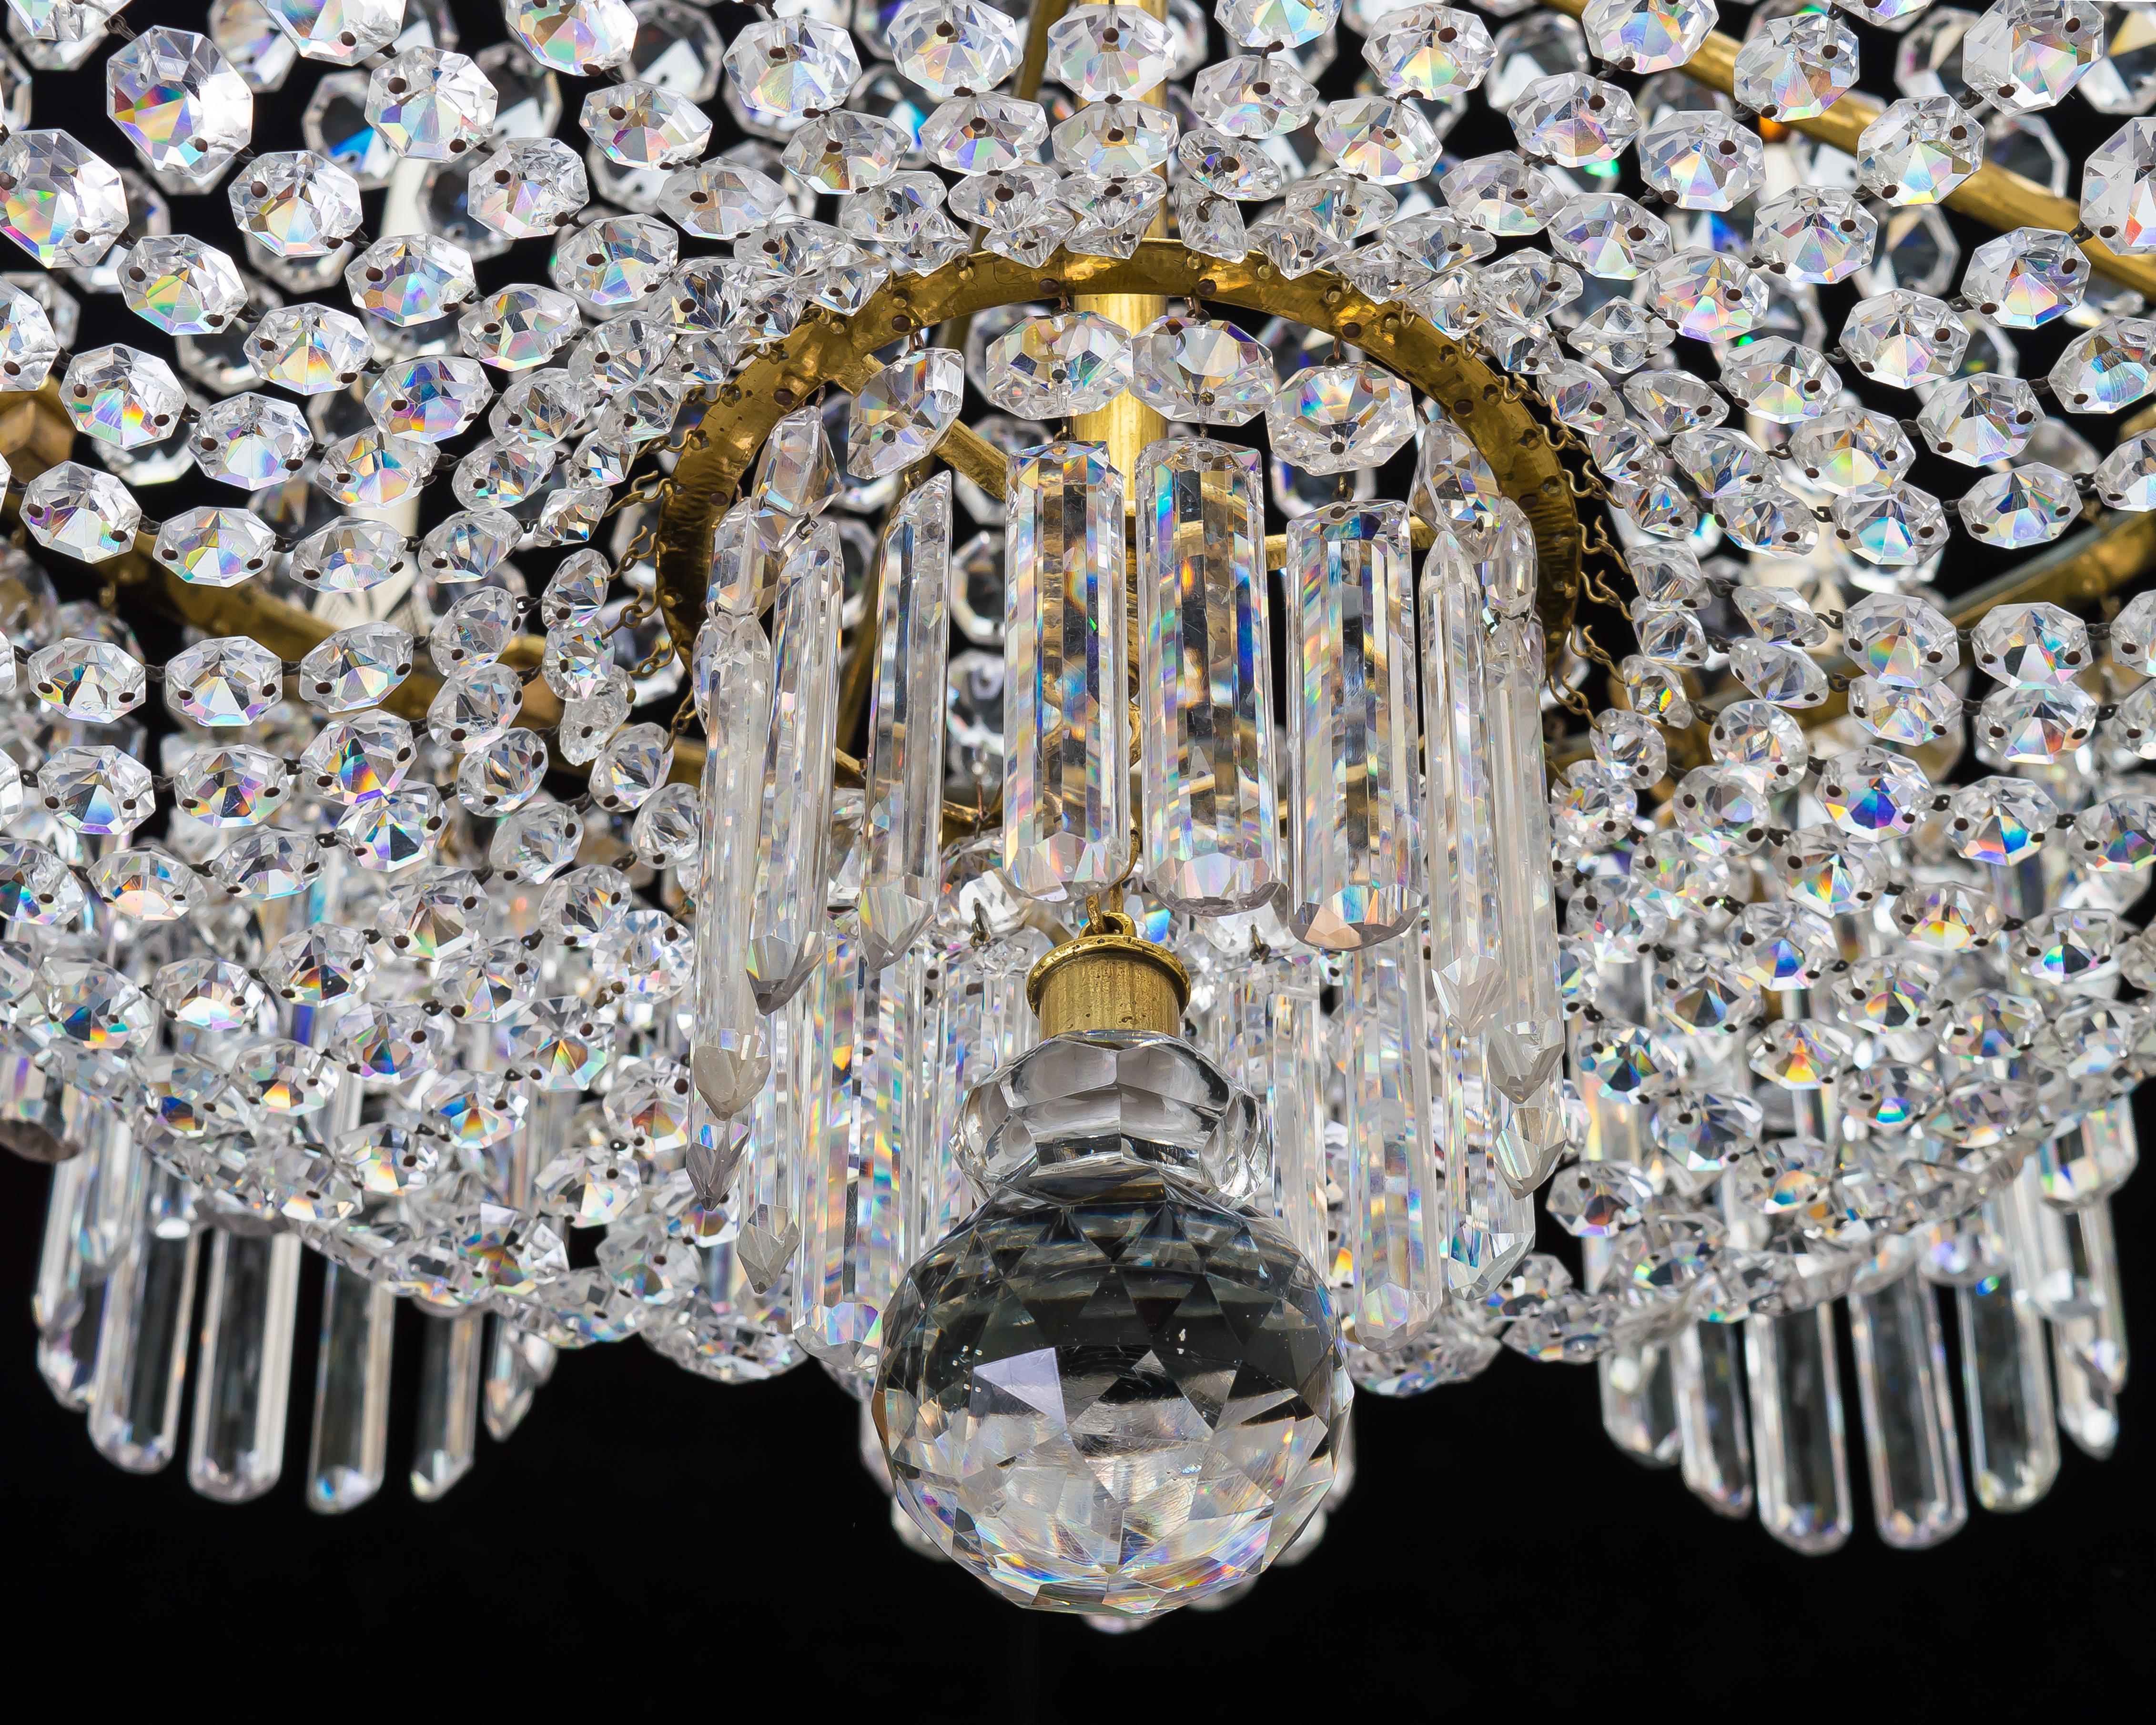 English Regency Crystal Chandelier of Classic Tent and Basket Design by John Blades